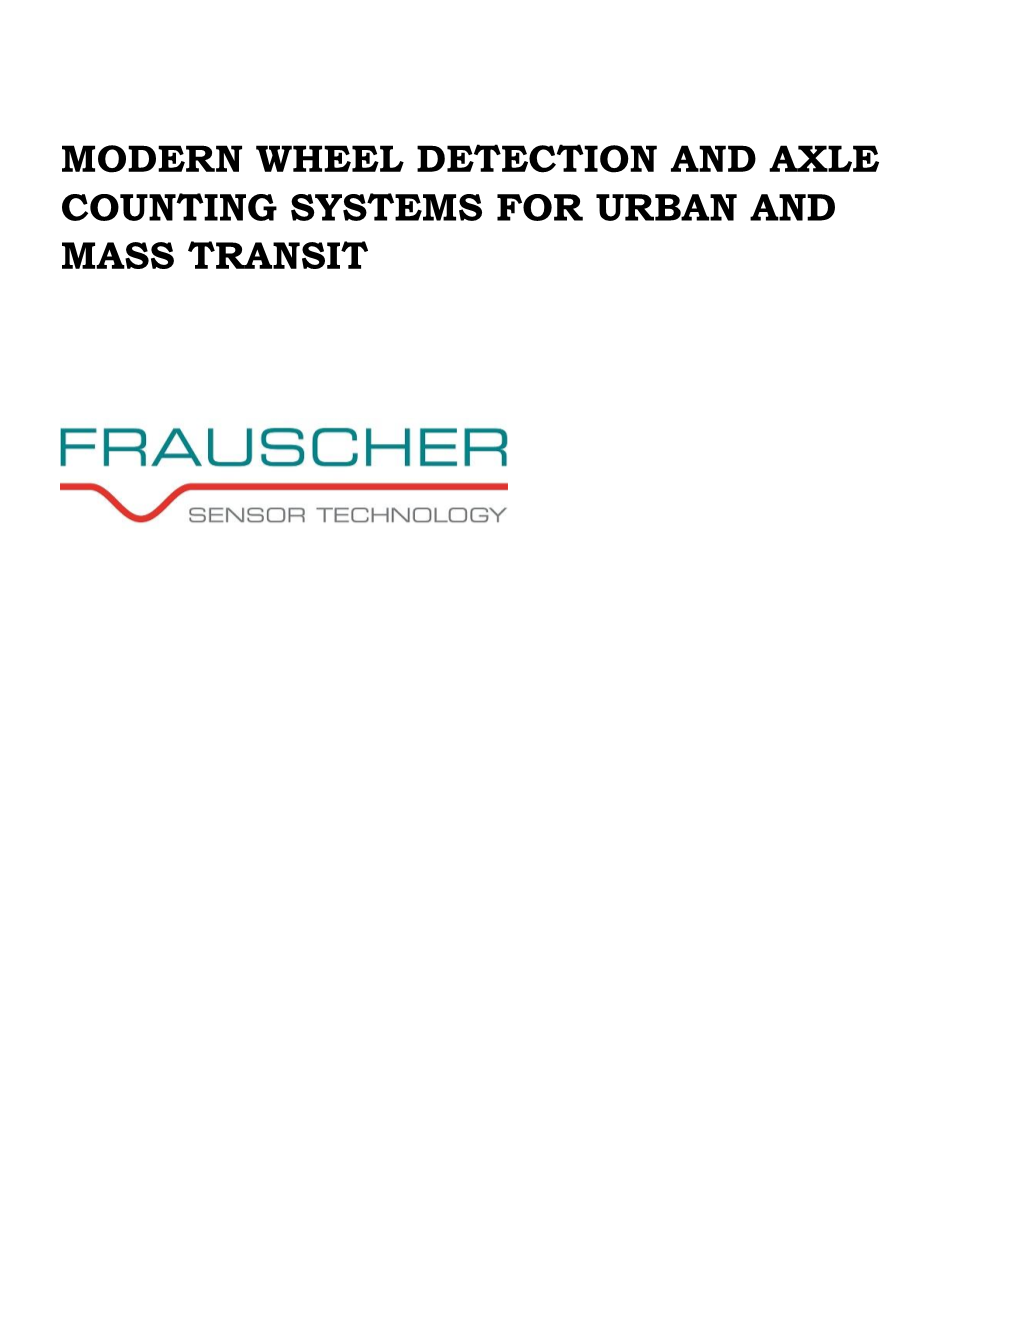 Modern Wheel Detection and Axle Counting Systems for Urban and Mass Transit